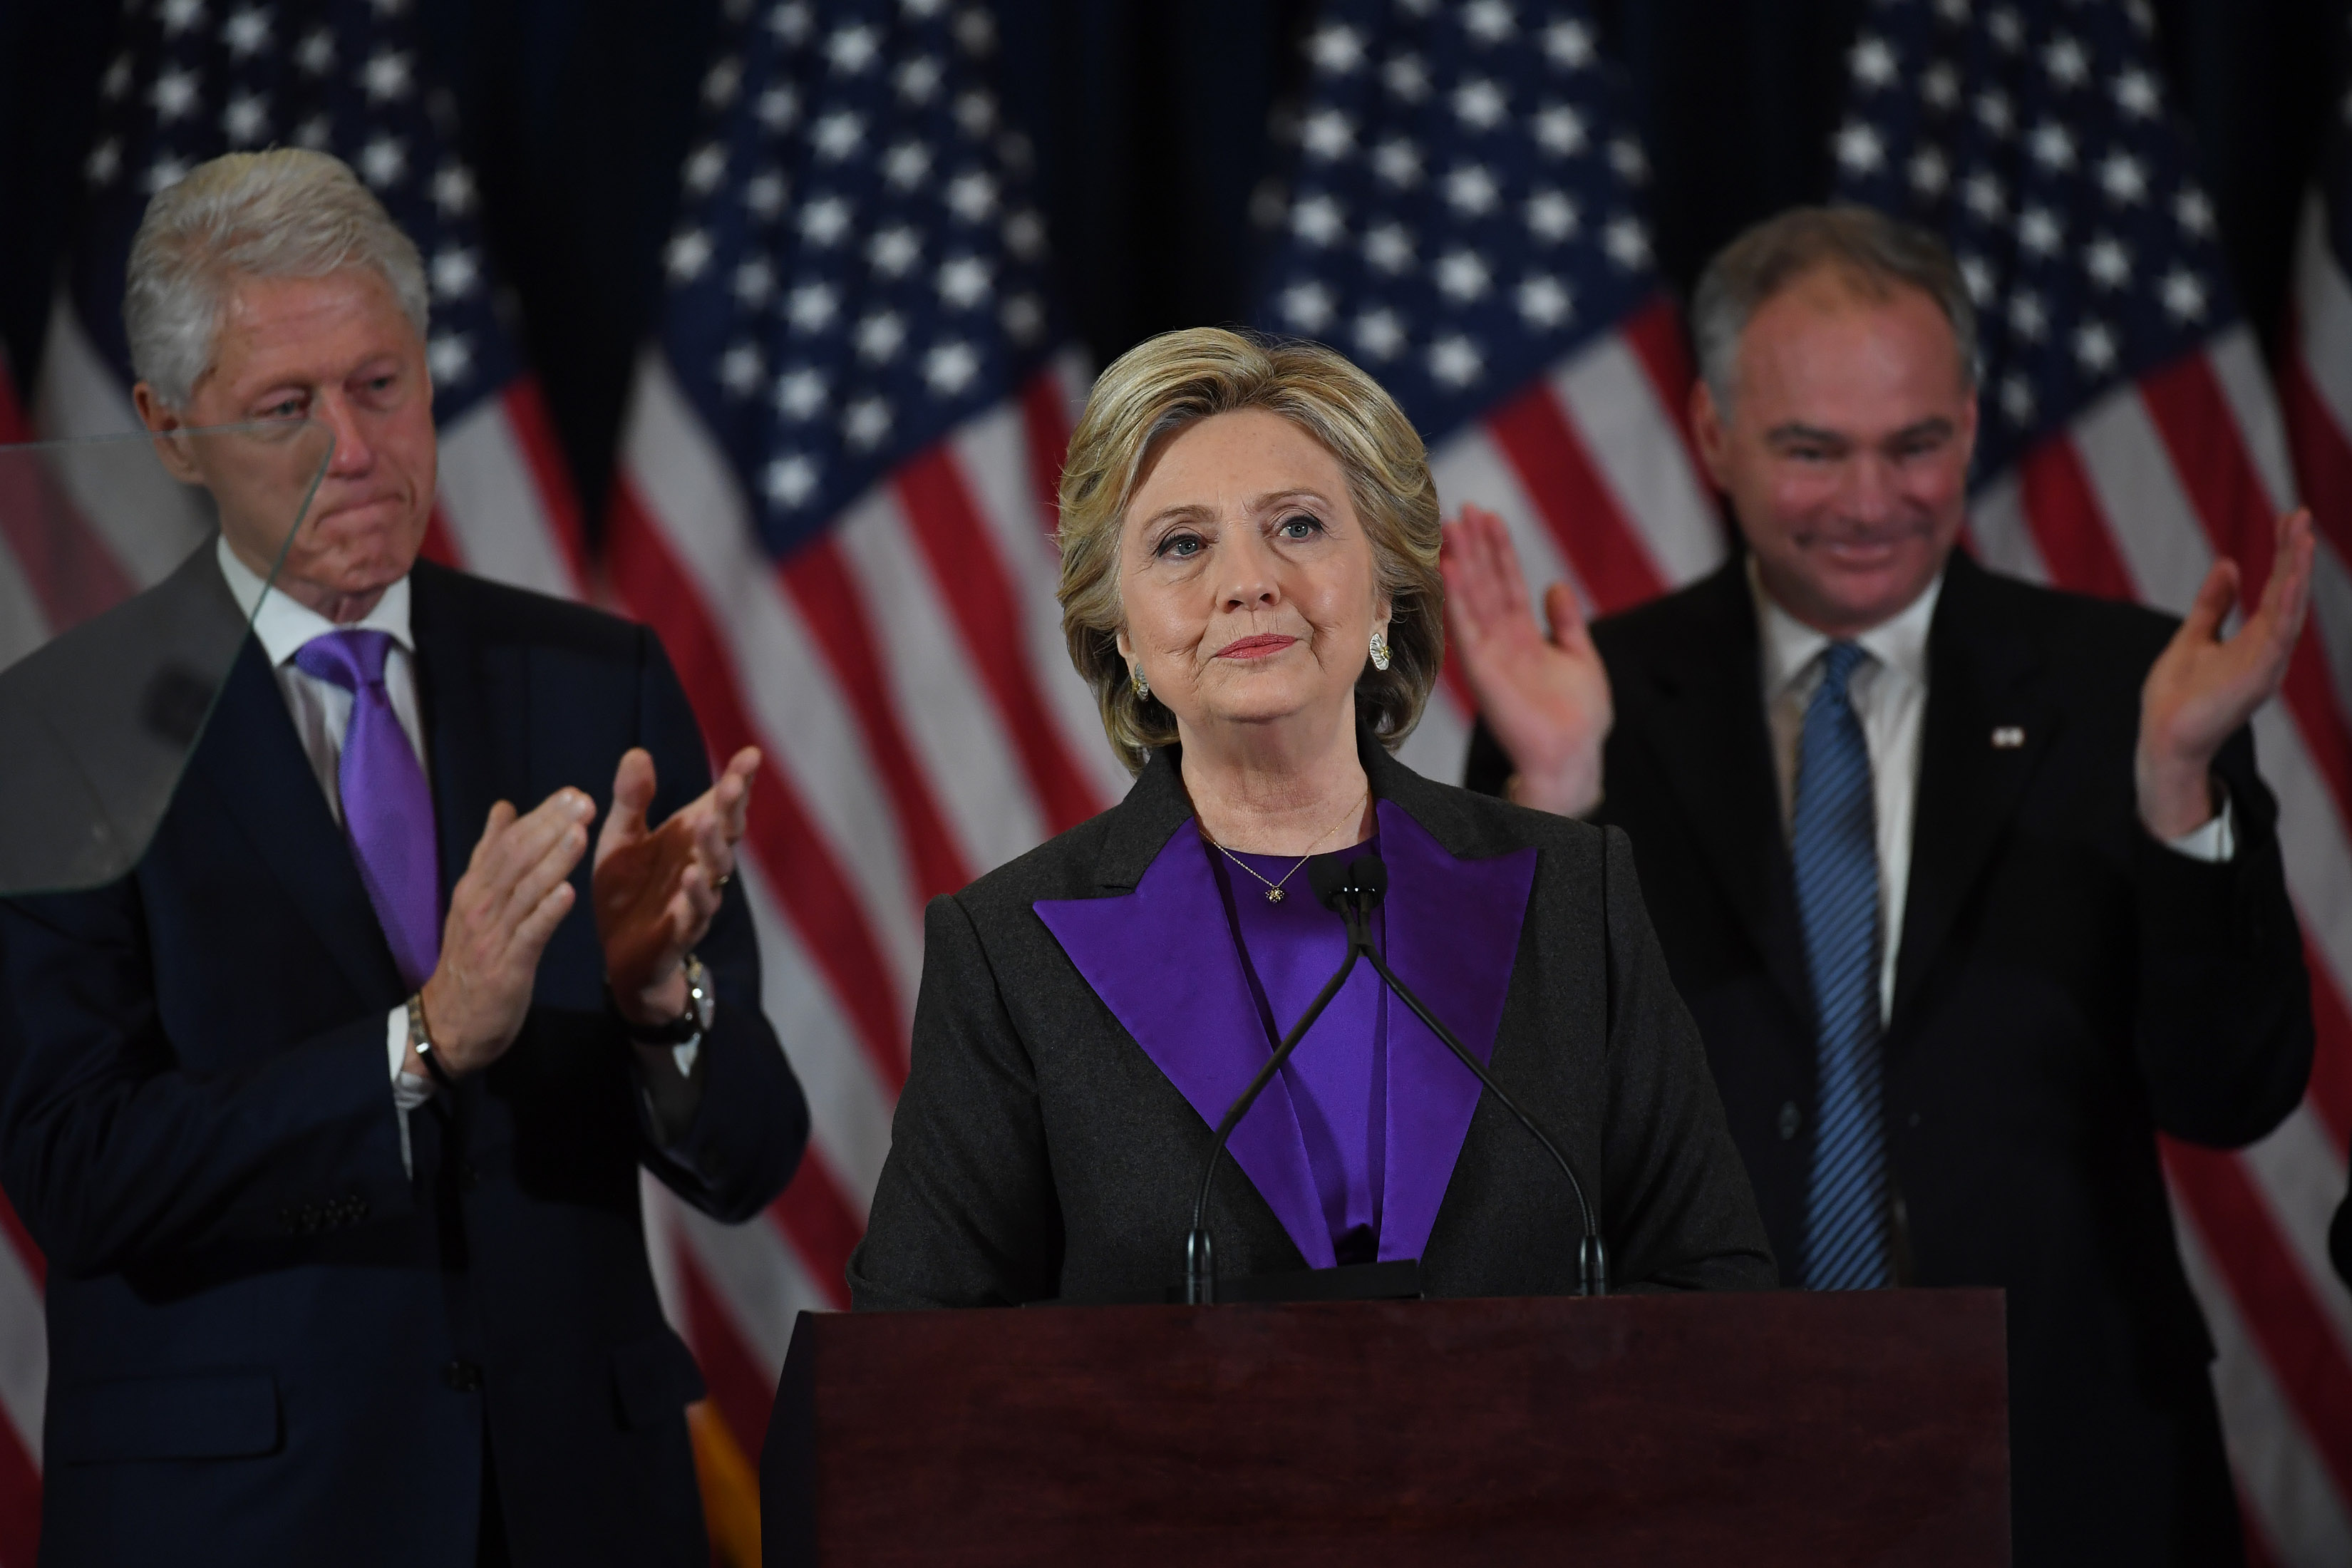 Hillary Clinton speaks during a press conference in New York Cityon Nov. 9, 2016 (Matt McClain—Washington Post/Getty Images)